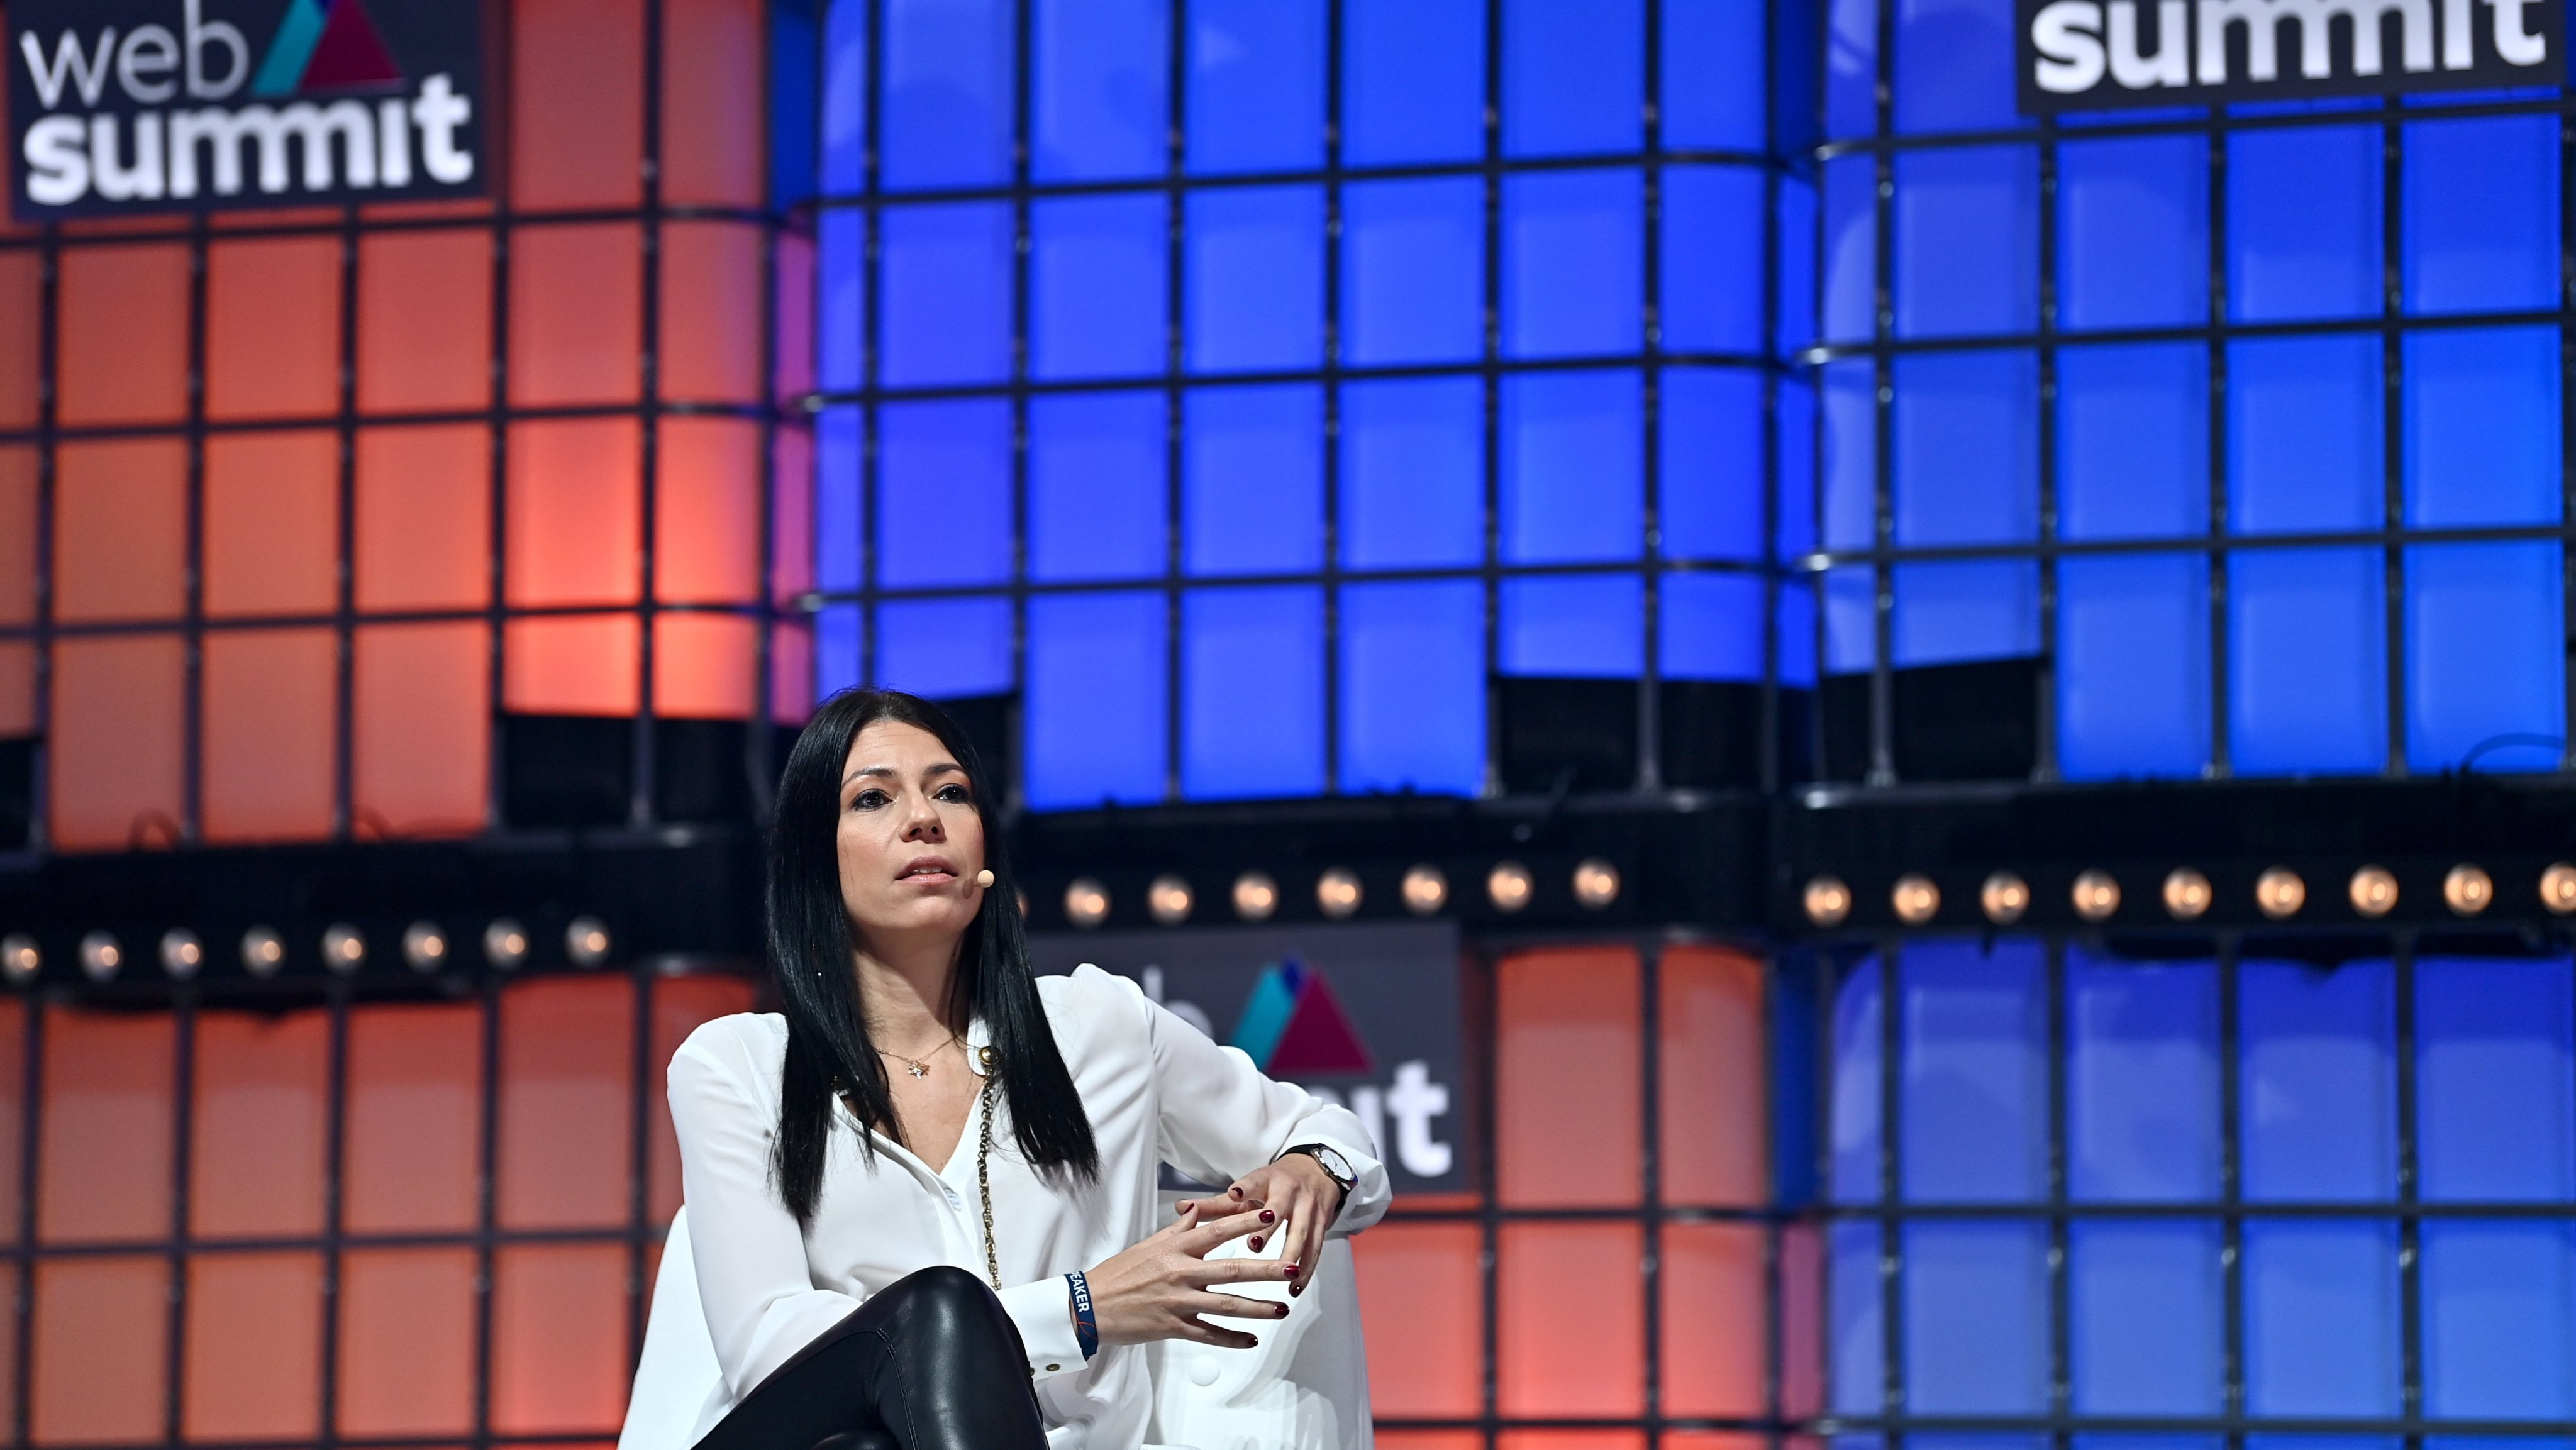 3 November 2021; Daniela Braga, Founder of Defined.ai, at Centre Stage during day two of Web Summit 2021 at the Altice Arena in Lisbon, Portugal. Photo by Eóin Noonan/Web Summit via Sportsfile